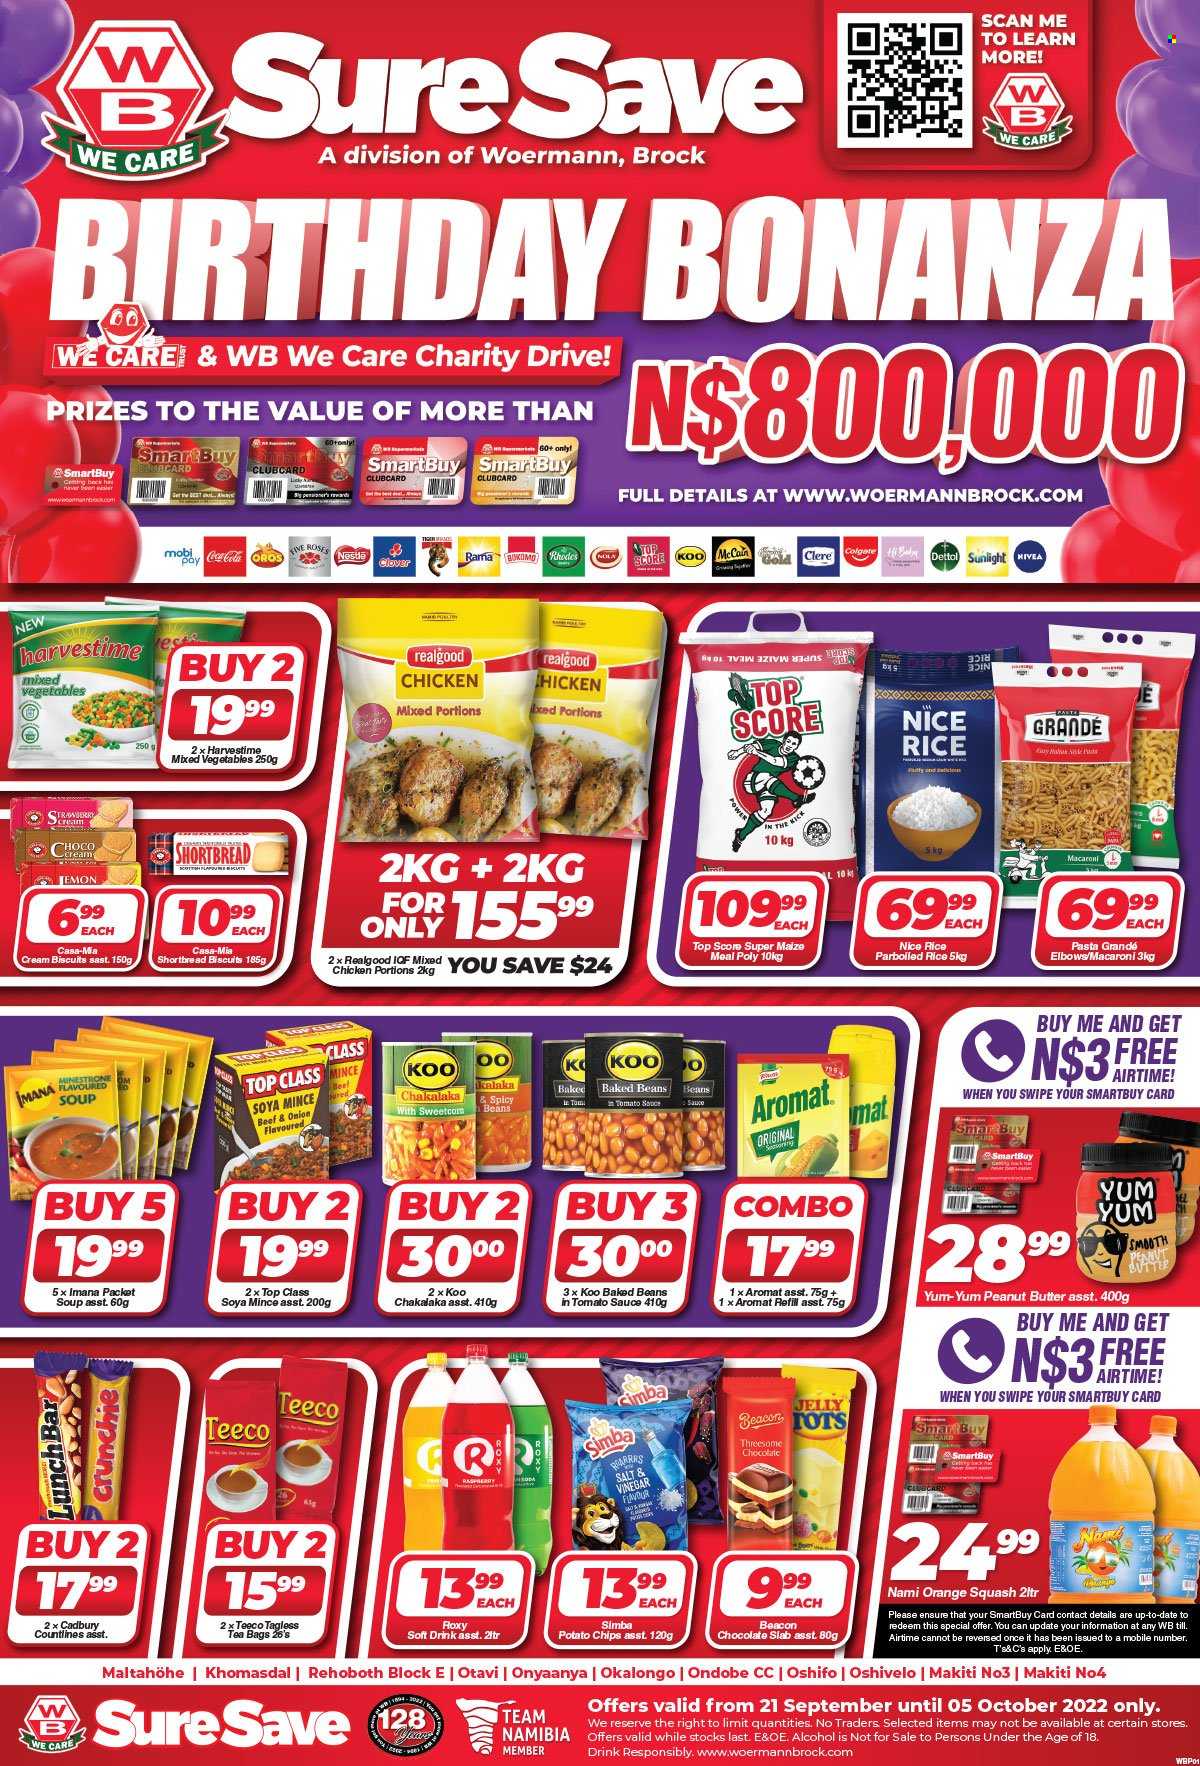 thumbnail - Woermann Brock catalogue  - 21/09/2022 - 05/10/2022 - Sales products - beans, macaroni, soup, pasta, chakalaka, Rama, mixed vegetables, Harvestime, McCain, Nestlé, chocolate, jelly, biscuit, Cadbury, potato chips, chips, Simba, maize meal, soya mince, baked beans, Koo, rice, parboiled rice, Pasta Grandé, peanut butter, Coca-Cola, soft drink, Oros, orange squash, tea bags, alcohol, Dettol, Sunlight, Colgate, Clere, Sure. Page 1.